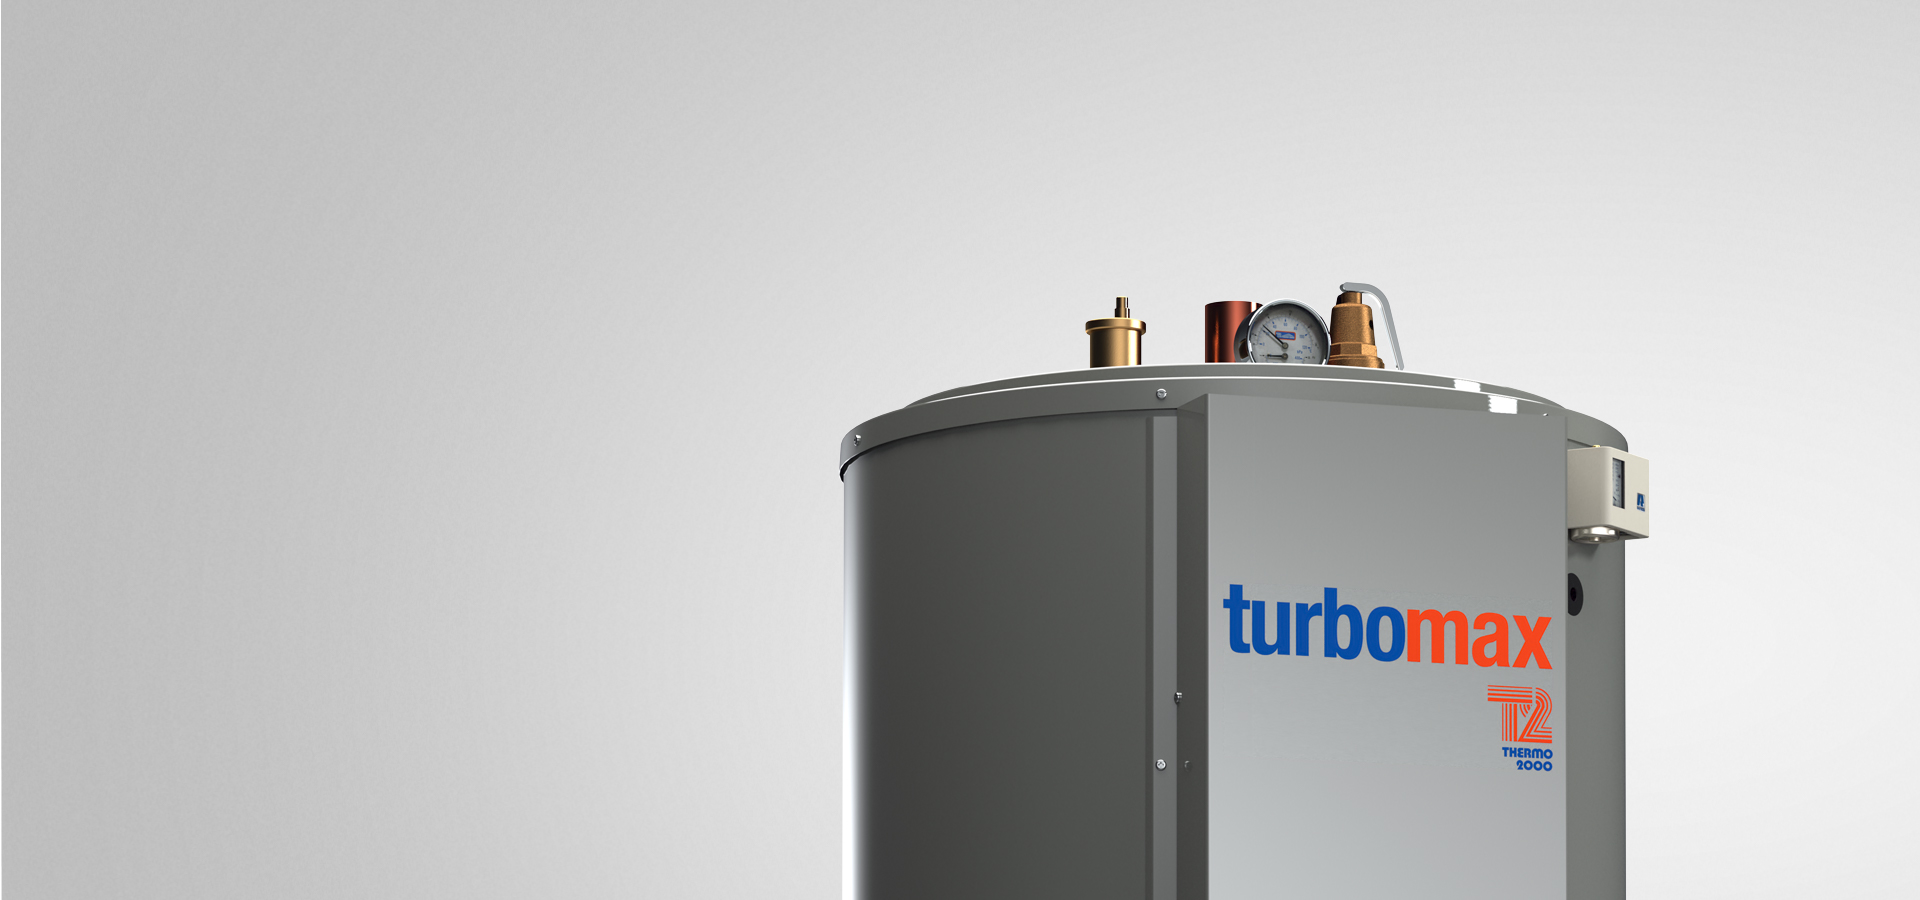 TurboMax instantaneous indirect water heater by Thermo 2000